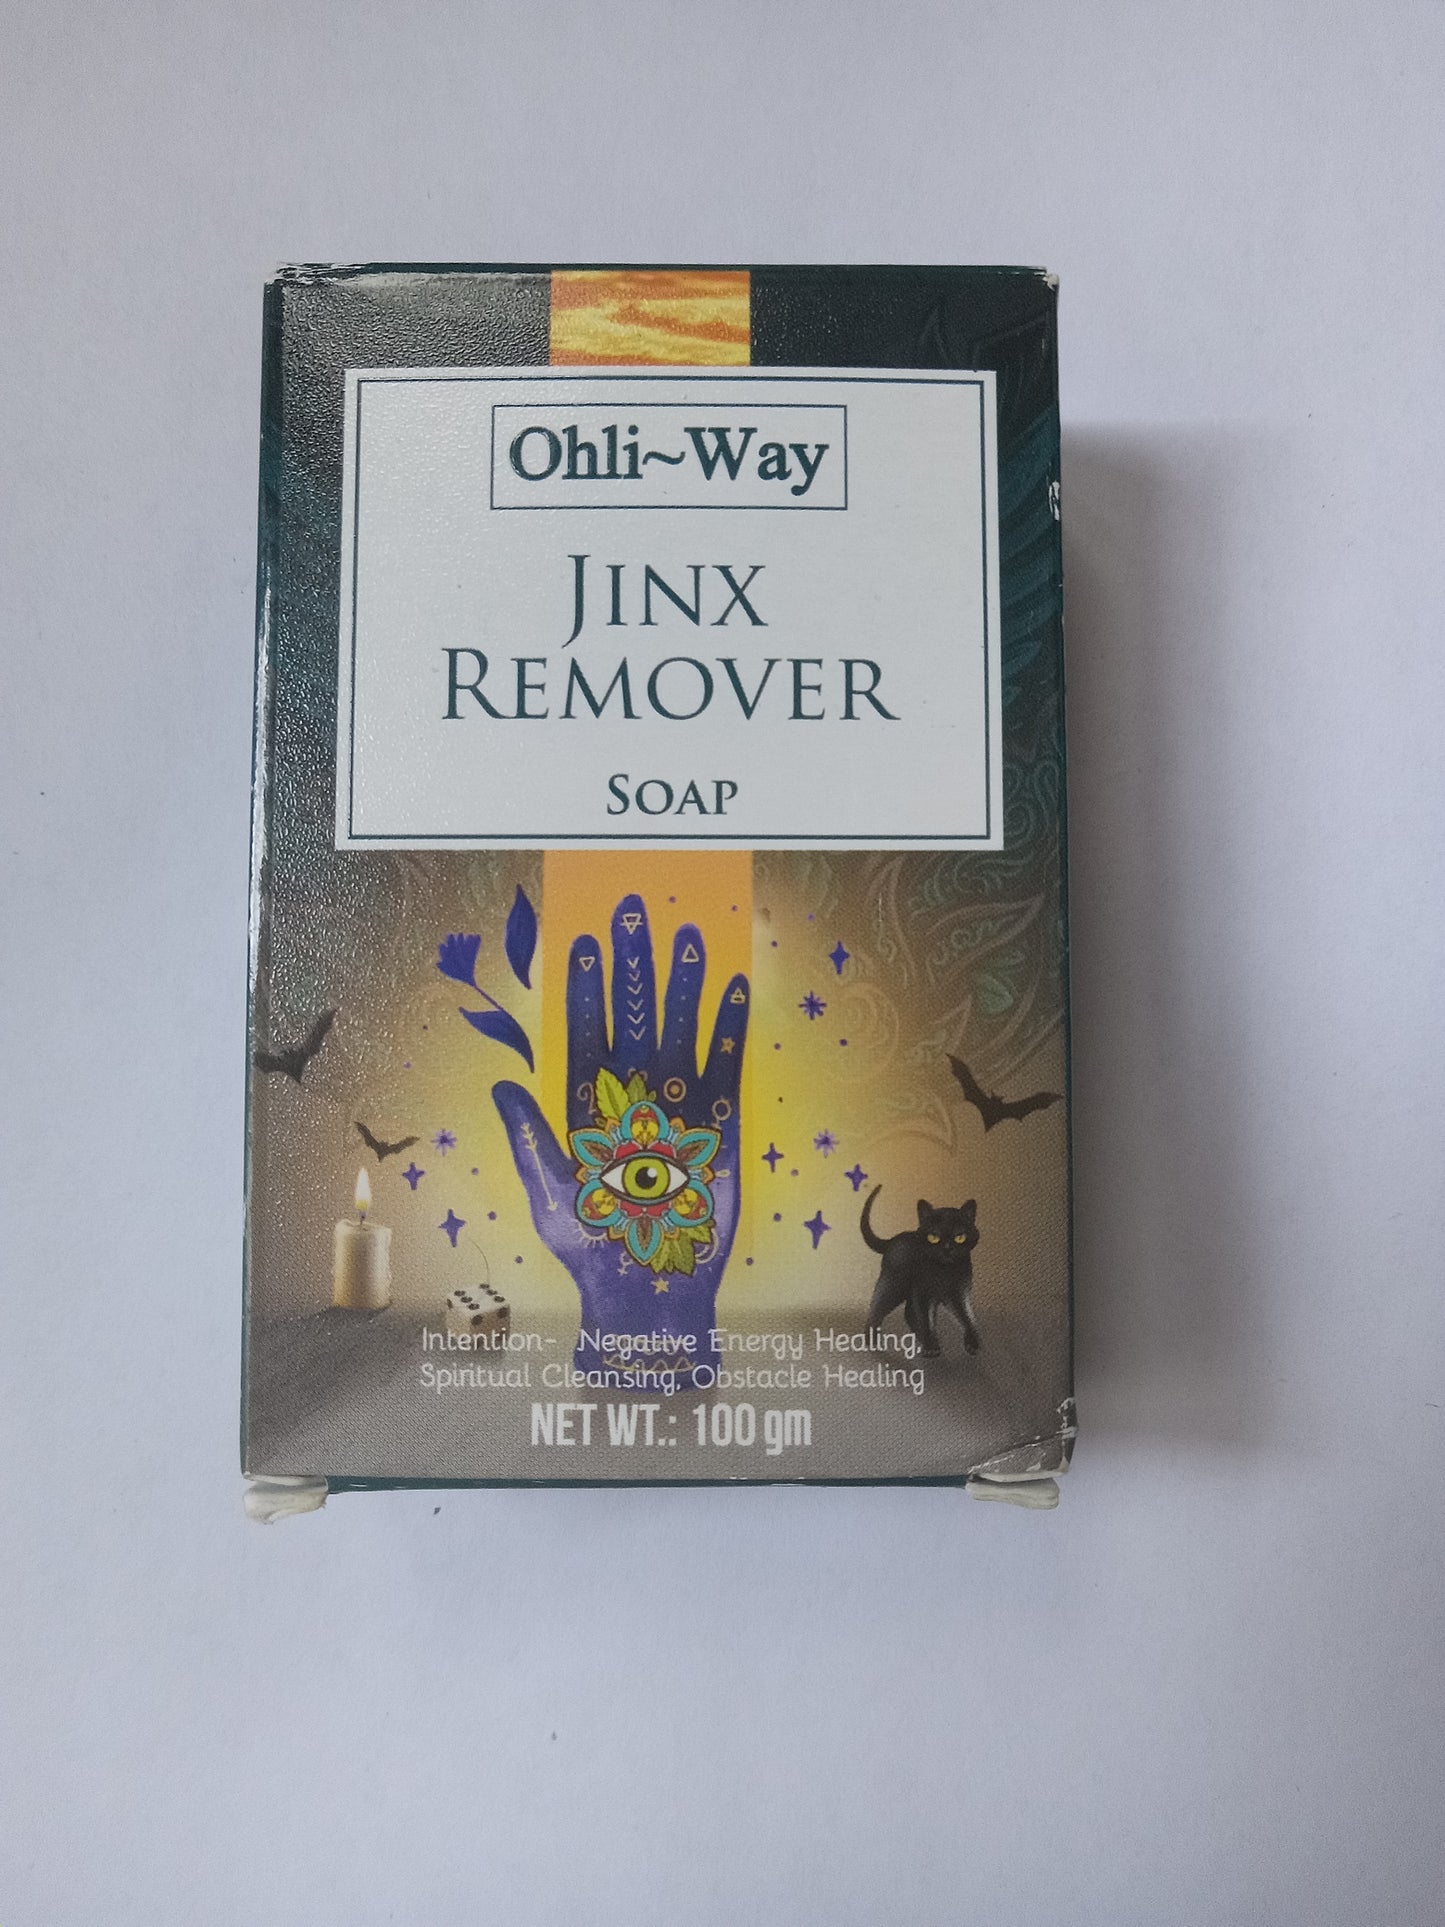  Jinx Remover Soap -  available at Amazing Creations Products . Grab yours for $5.50 today!